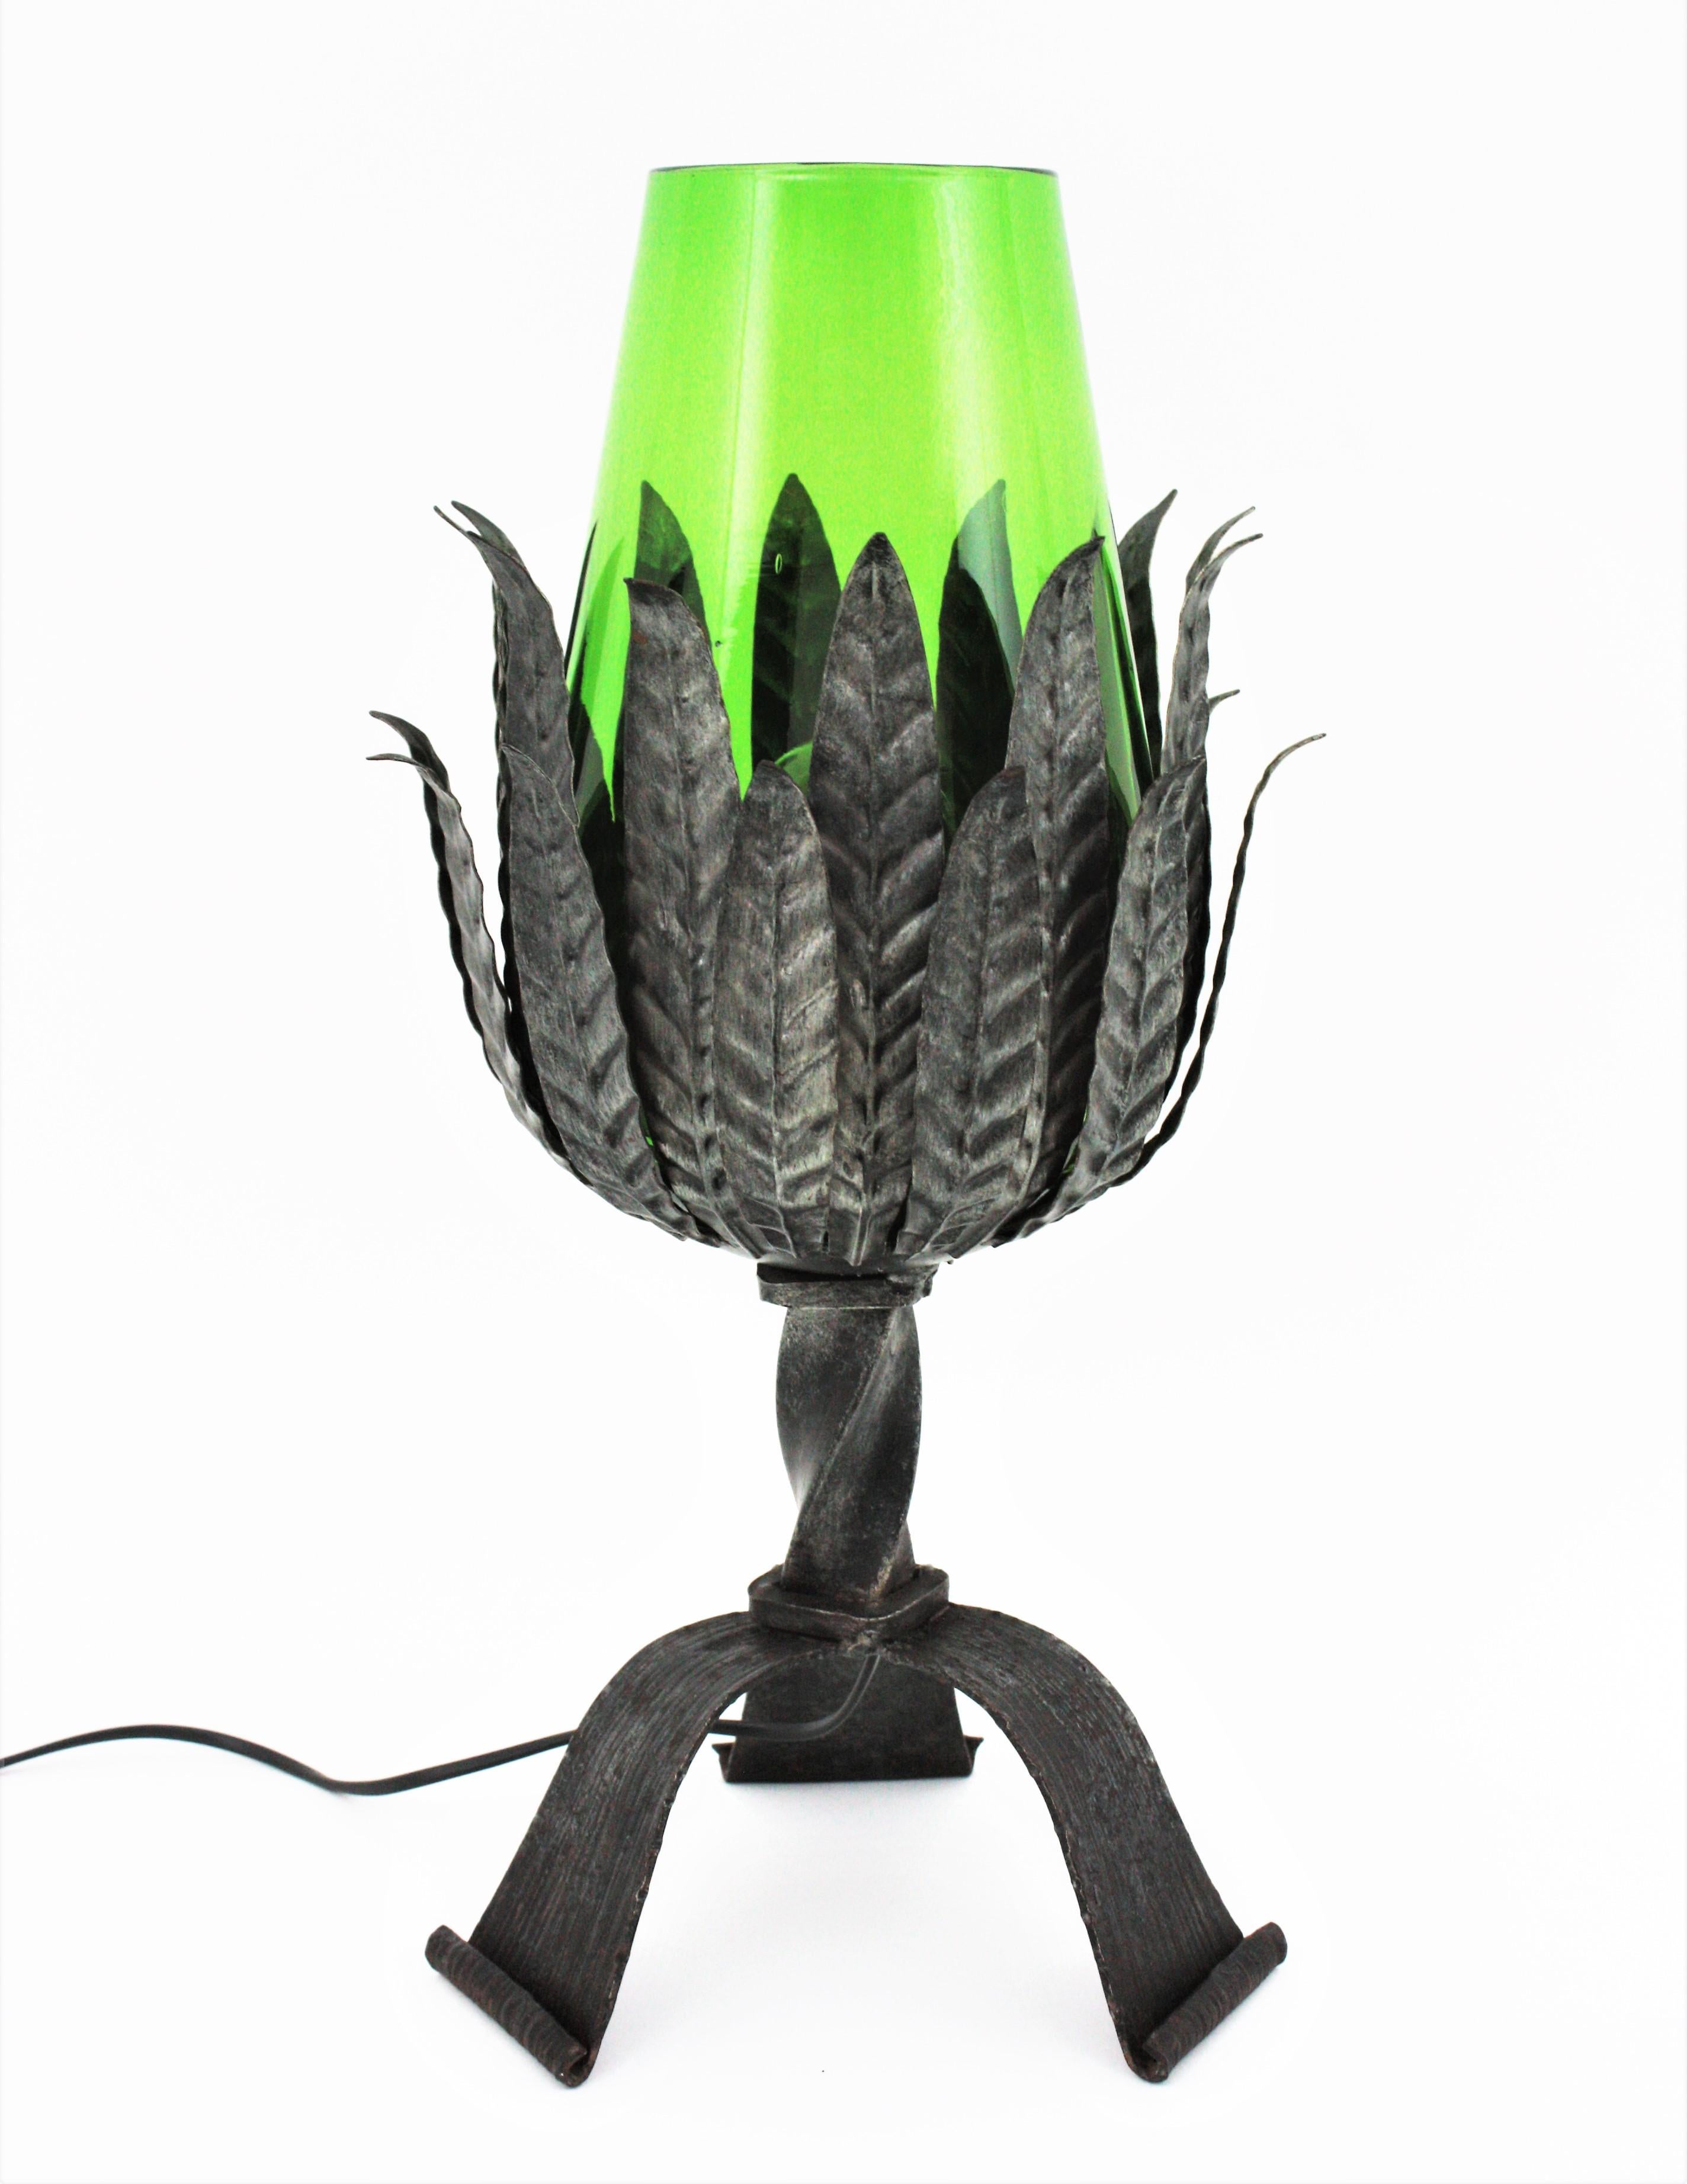 Spanish Table Lamp, Wrought Iron and Green Glass, 1950s In Good Condition For Sale In Barcelona, ES